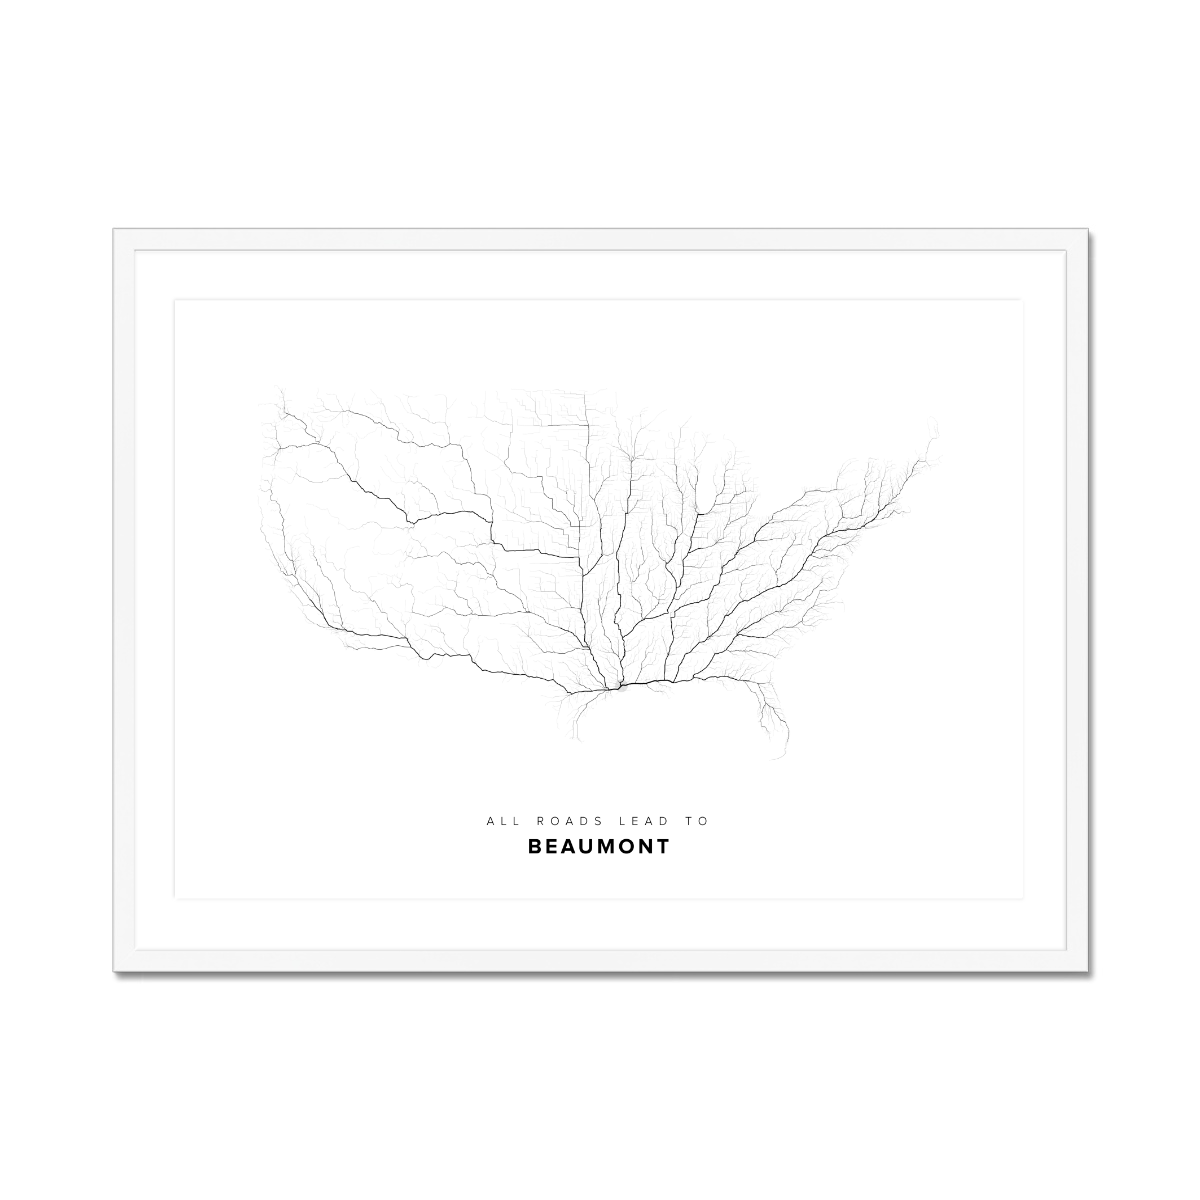 All roads lead to Beaumont (United States of America) Fine Art Map Print